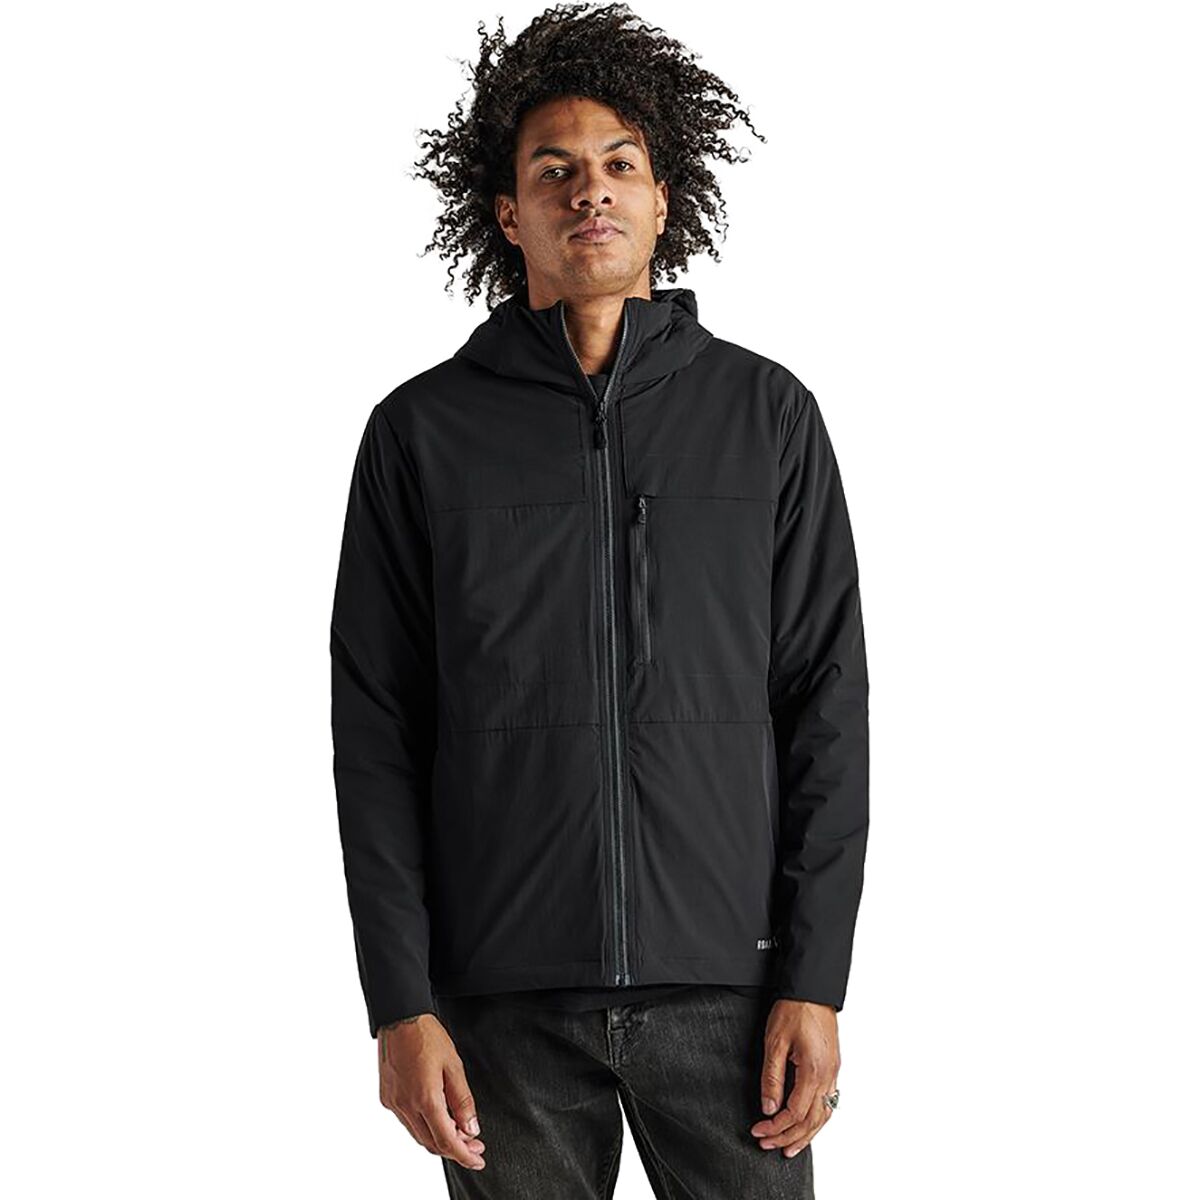 Layover 2.0 Insulated Jacket - Men